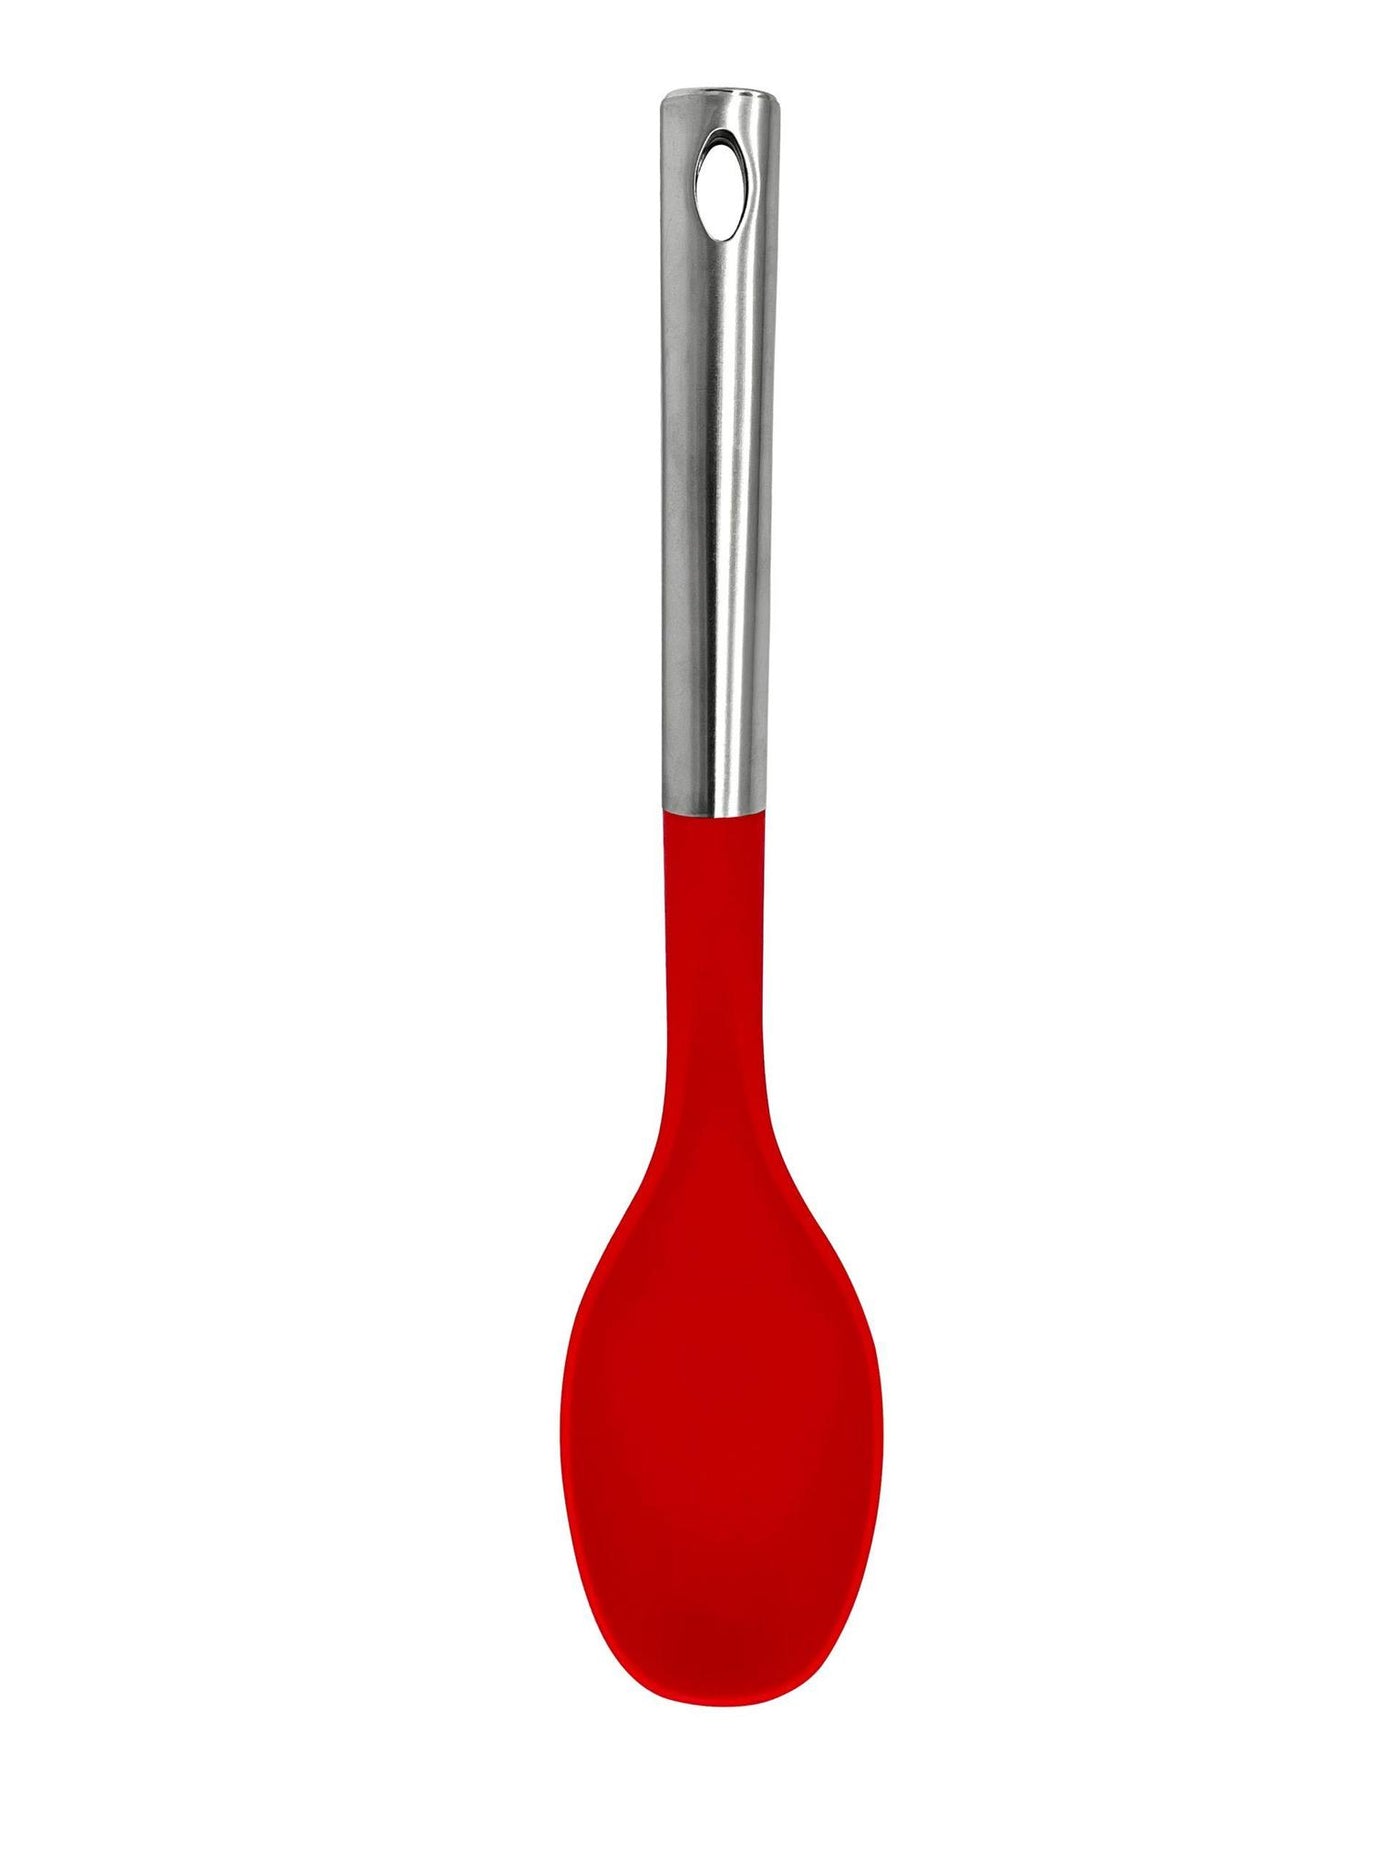 Millvado - Nylon Utensils SS Handle, Solid Spoon, Red,13.5'' - Set With Style